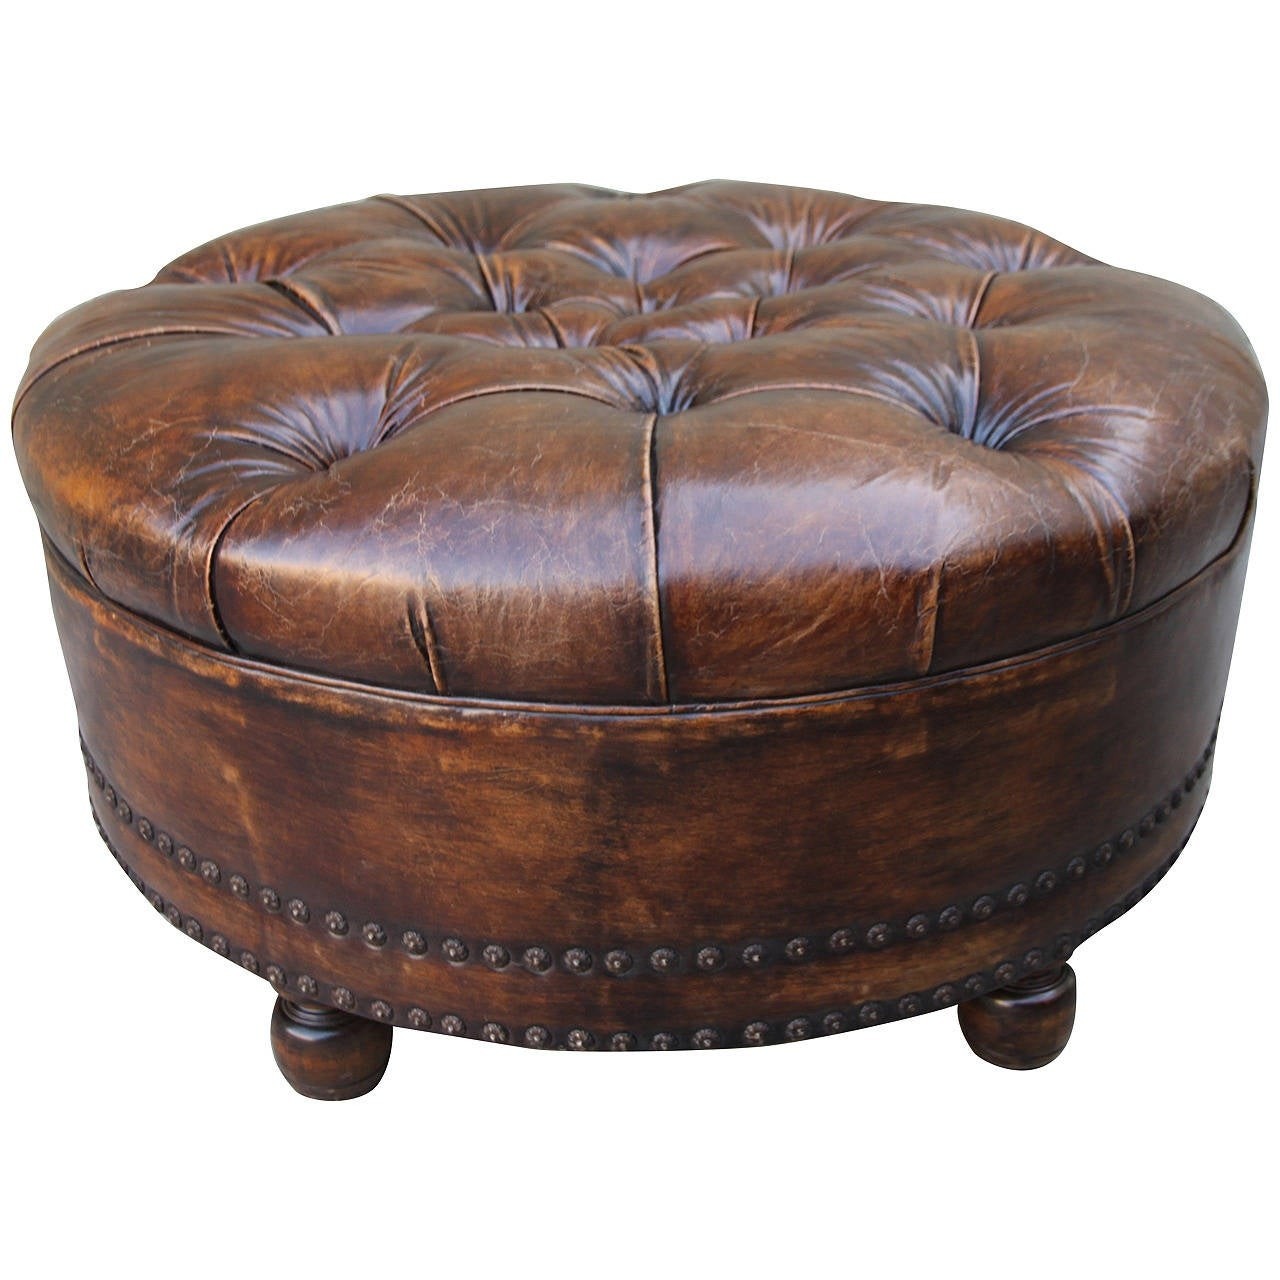 Leather tufted round ottoman at 1stdibs